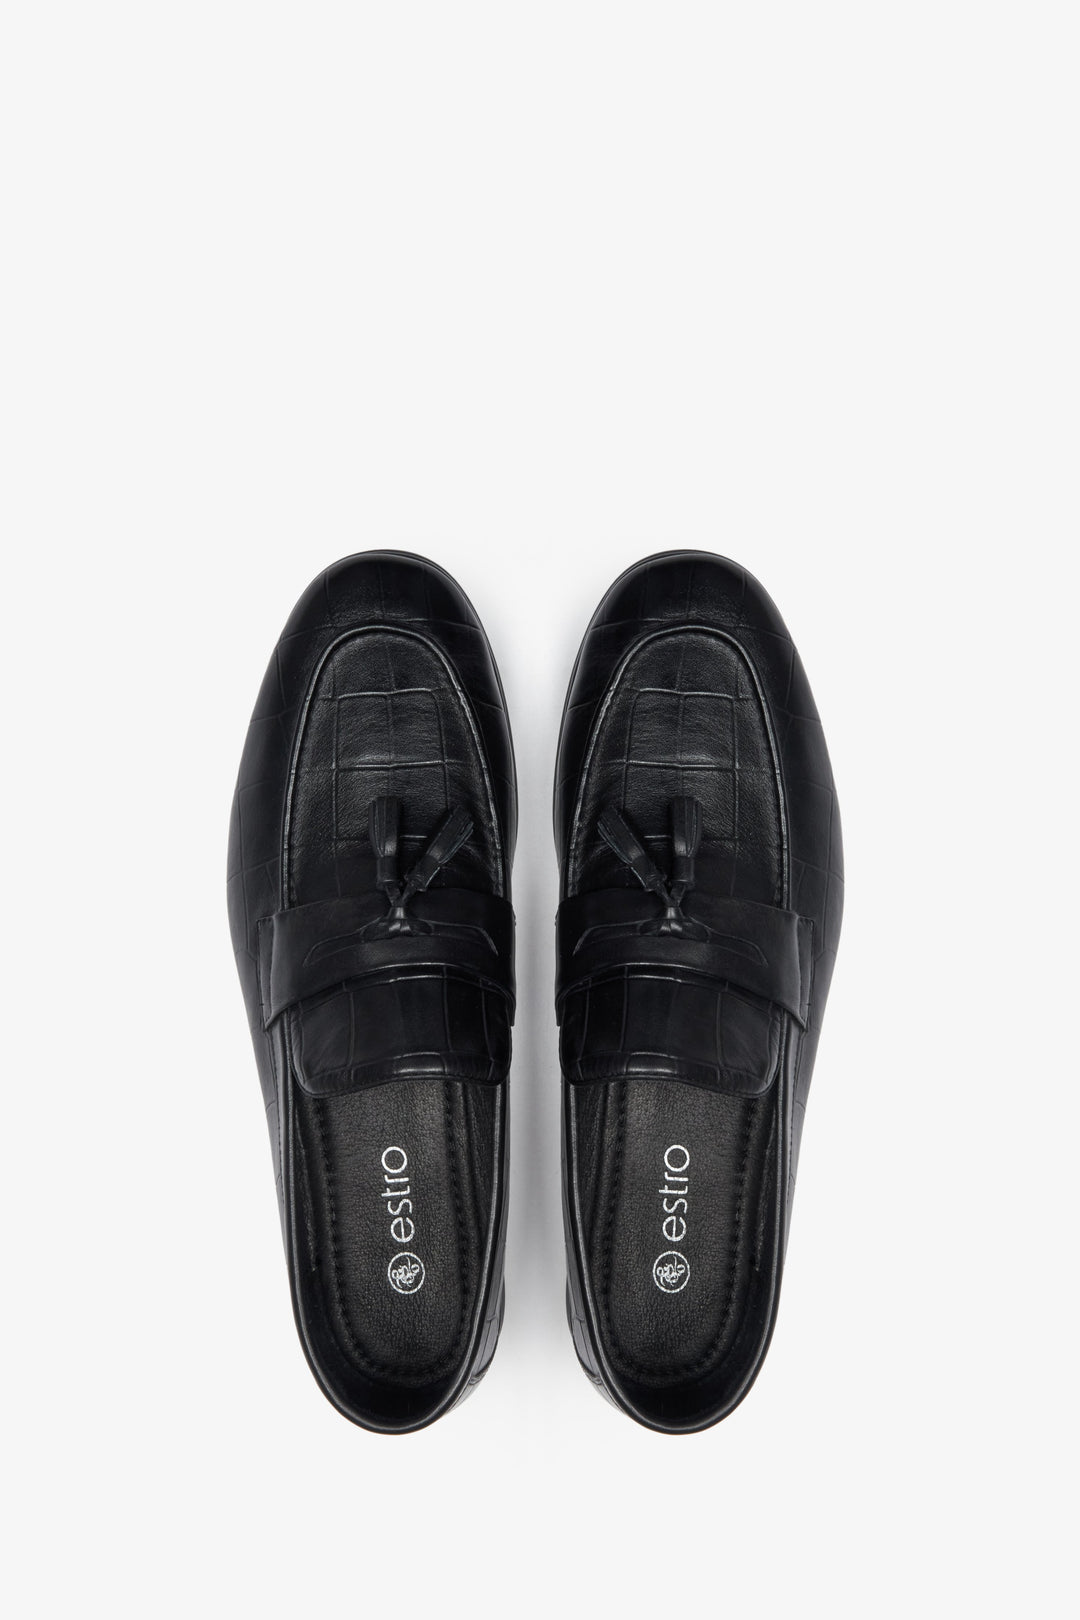 Men's black leather loafers for fall by Estro - top view close-up of the footwear.